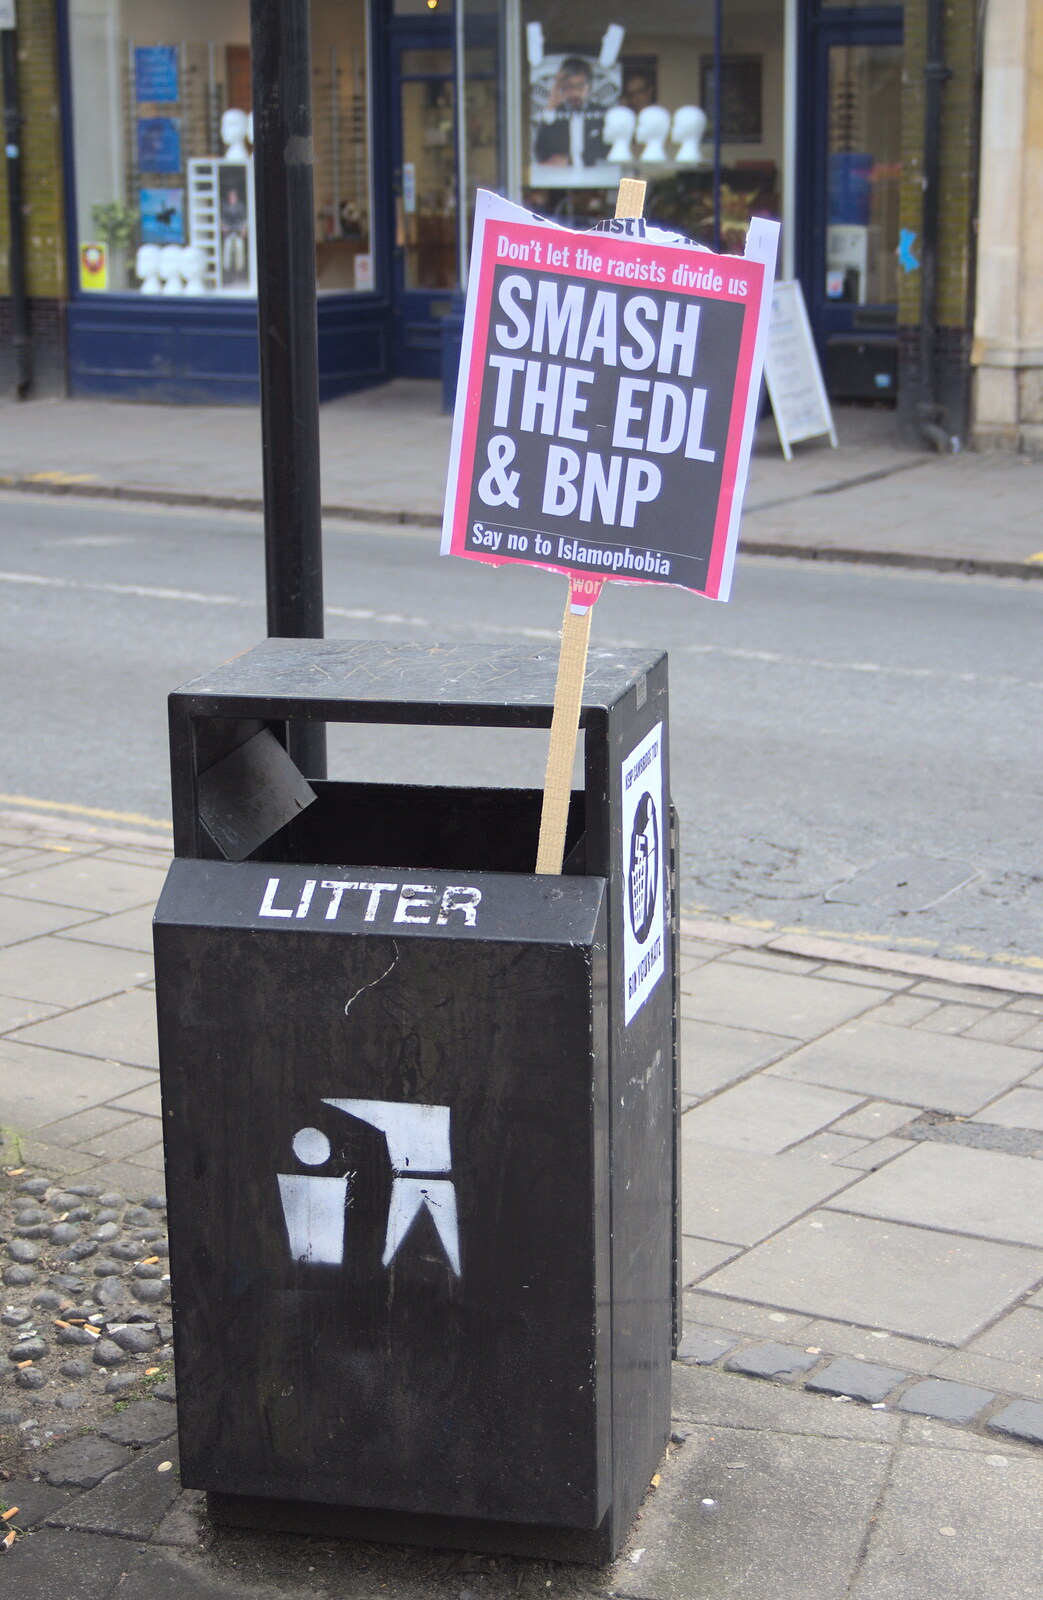 A placard is left in a bin from An Anti-Fascist March, Mill Road, Cambridge - 23rd February 2013